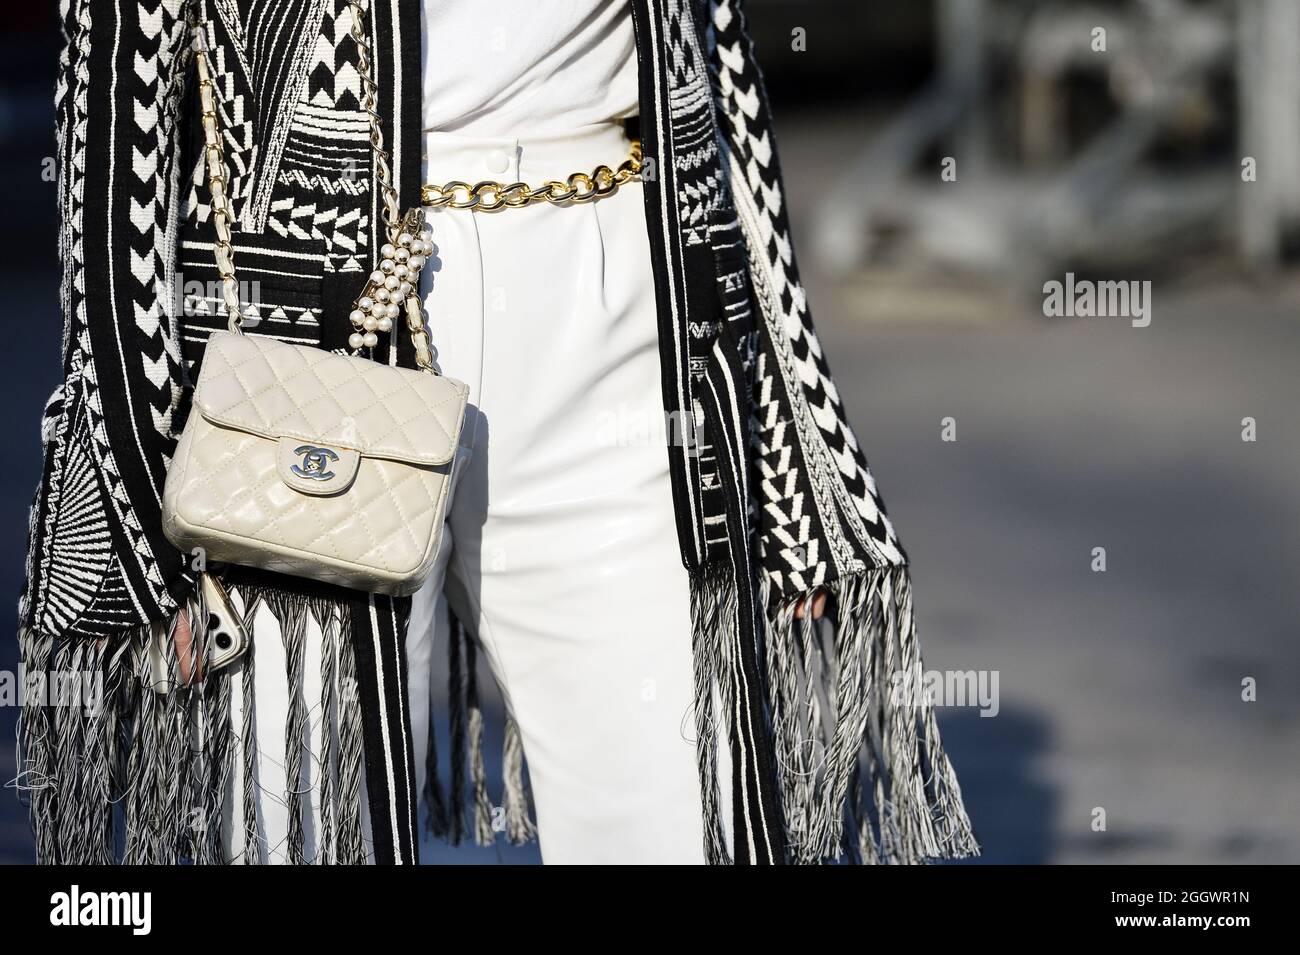 Short History of The Famous Chanel 255 Bag  StyleFrizz